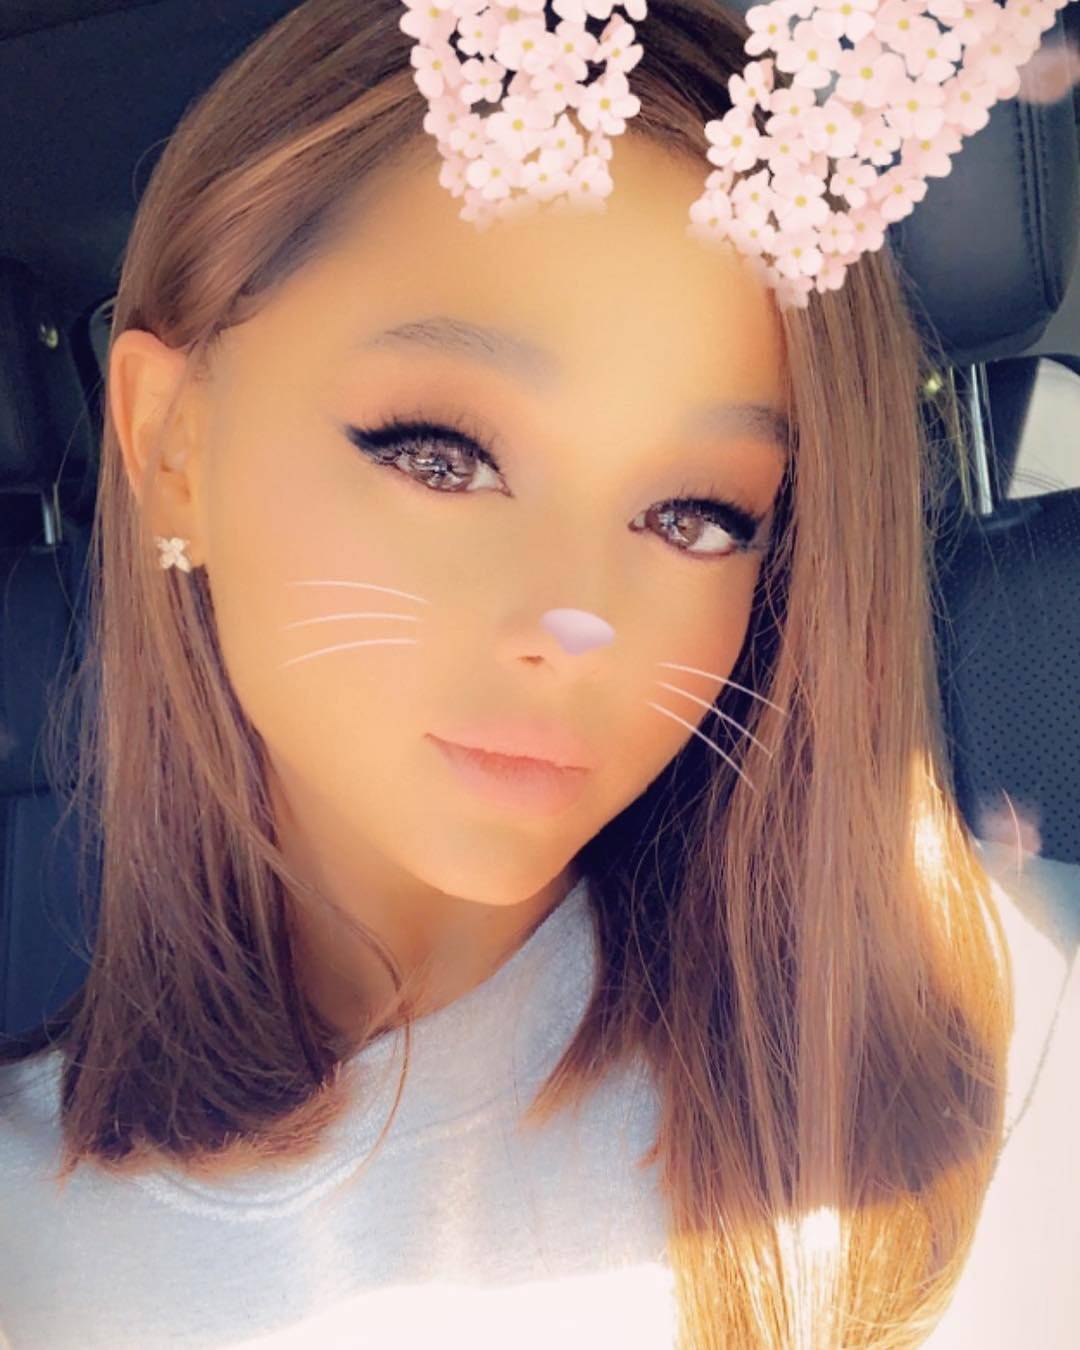 Ariana Grande Cuts Off Ponytail And Debuts A New Look | Electric 94.9